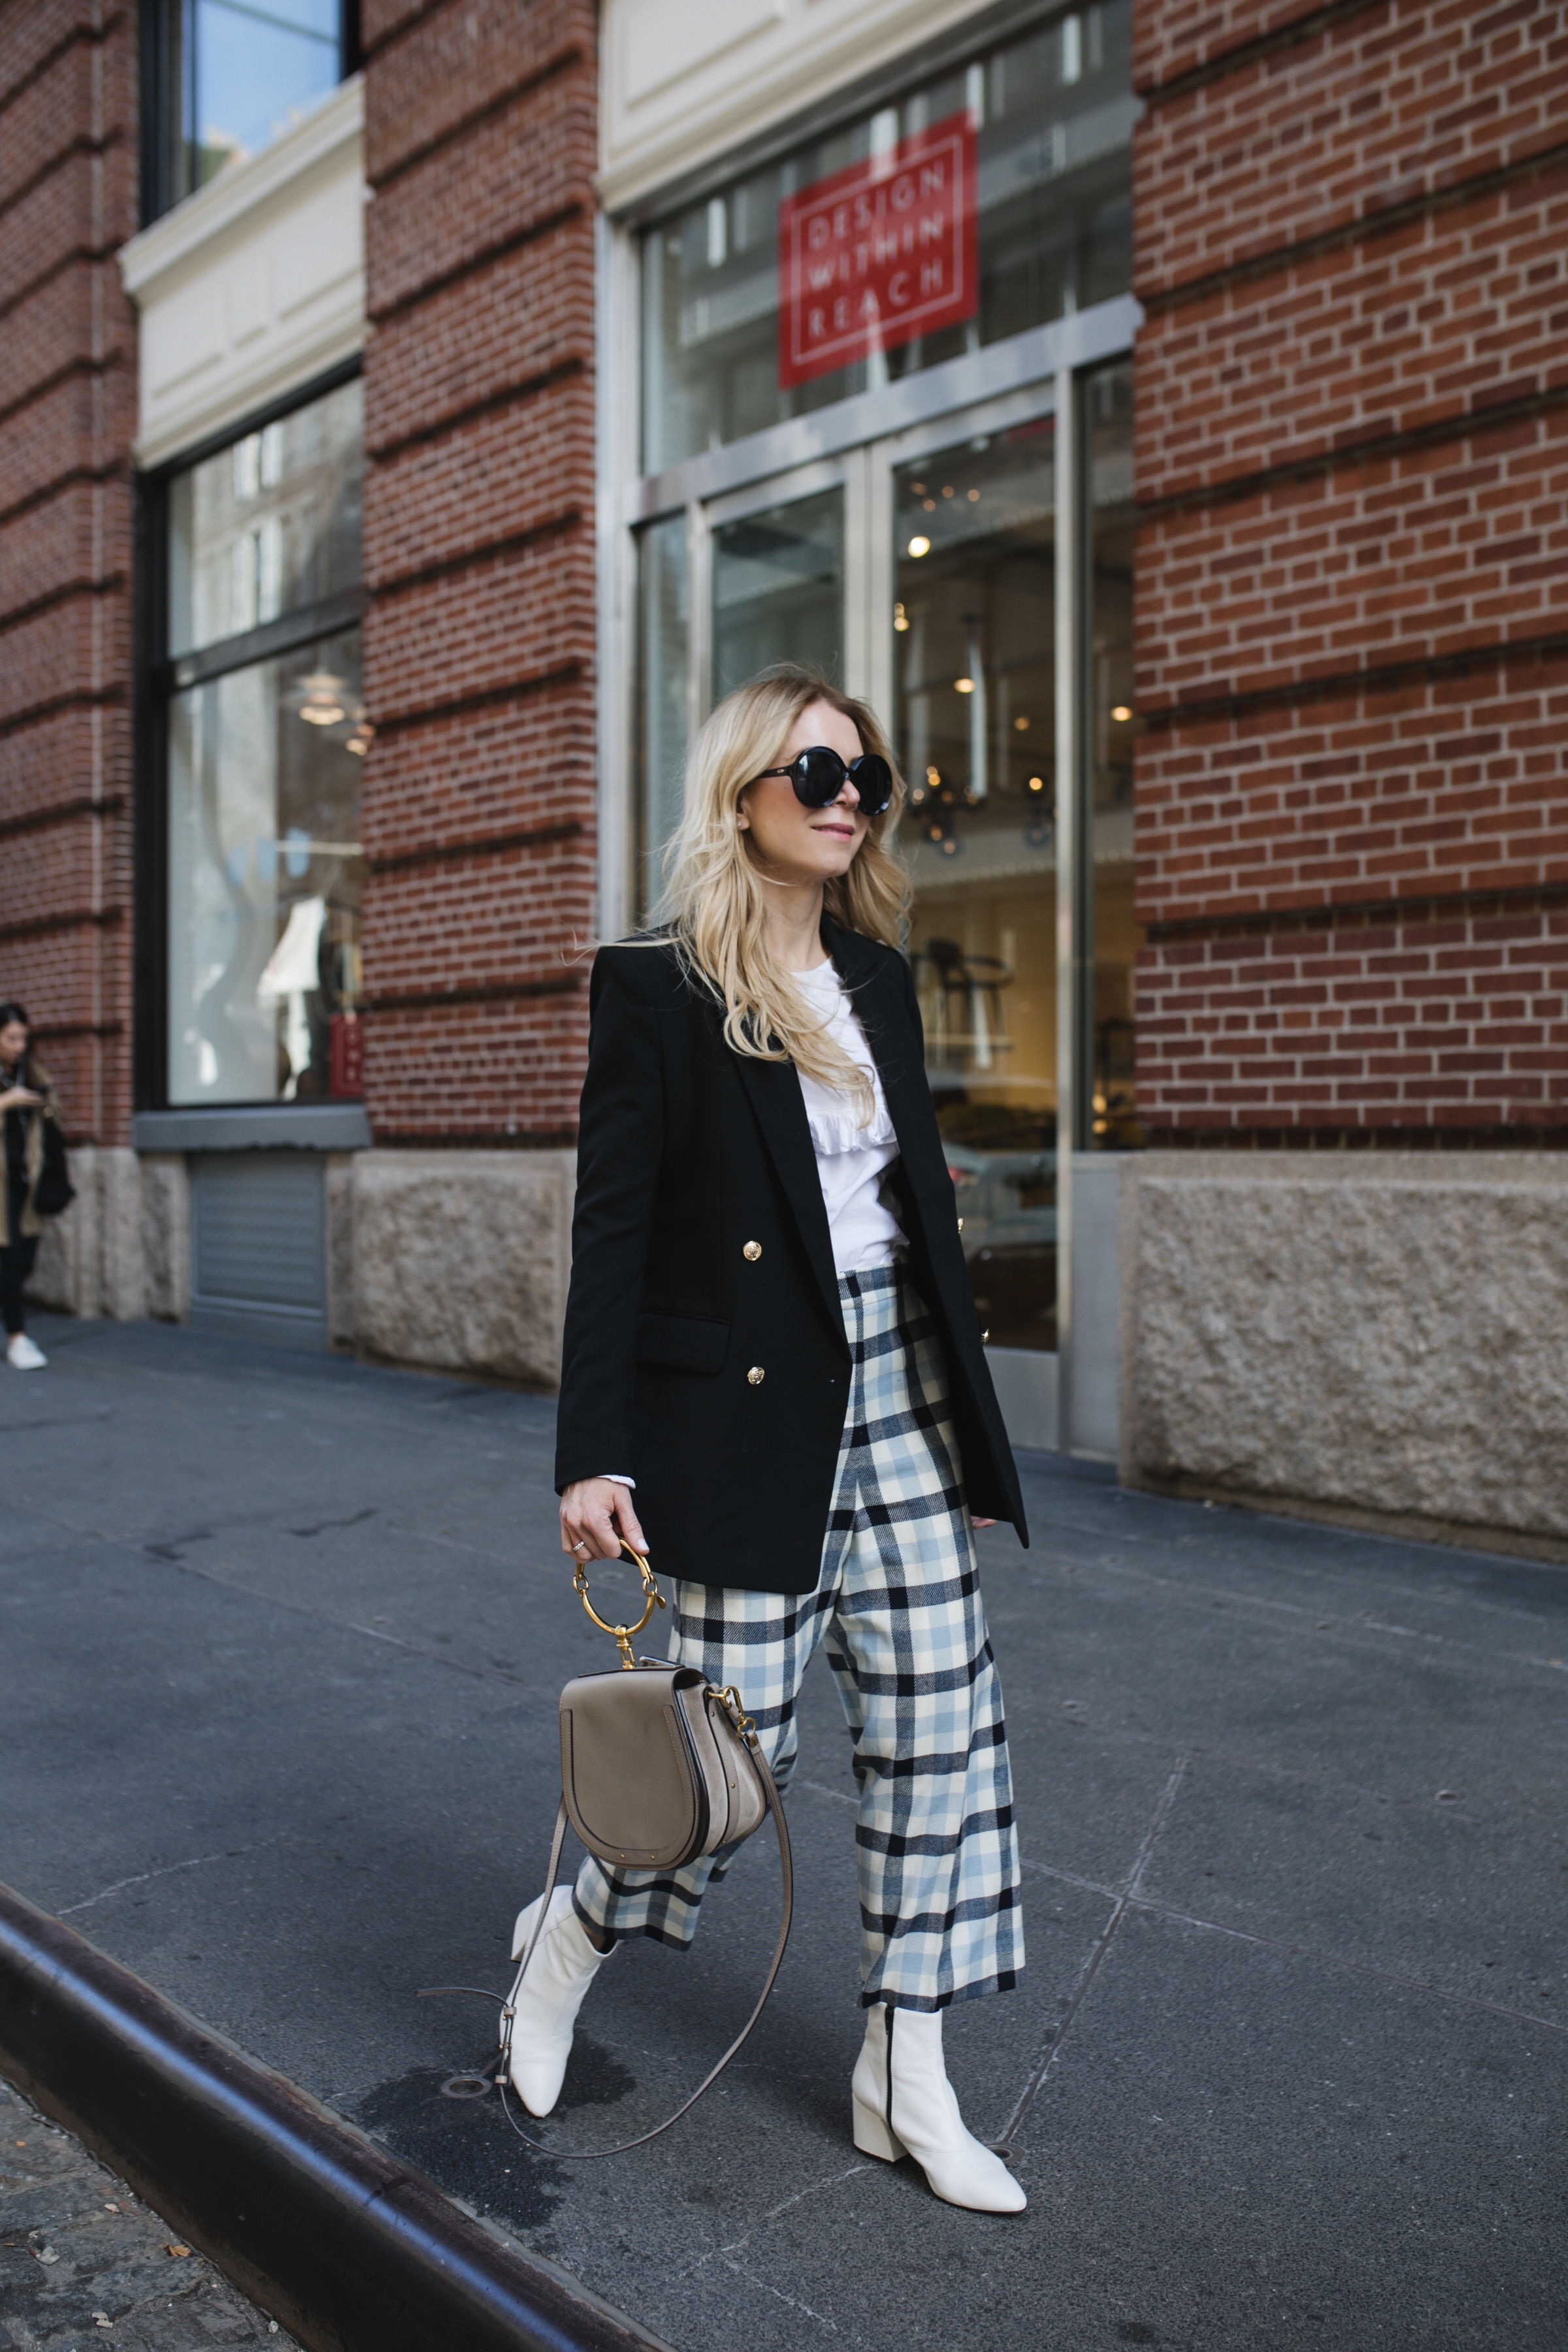 The Perfect Blazer + Fun Culottes | About The Outfits